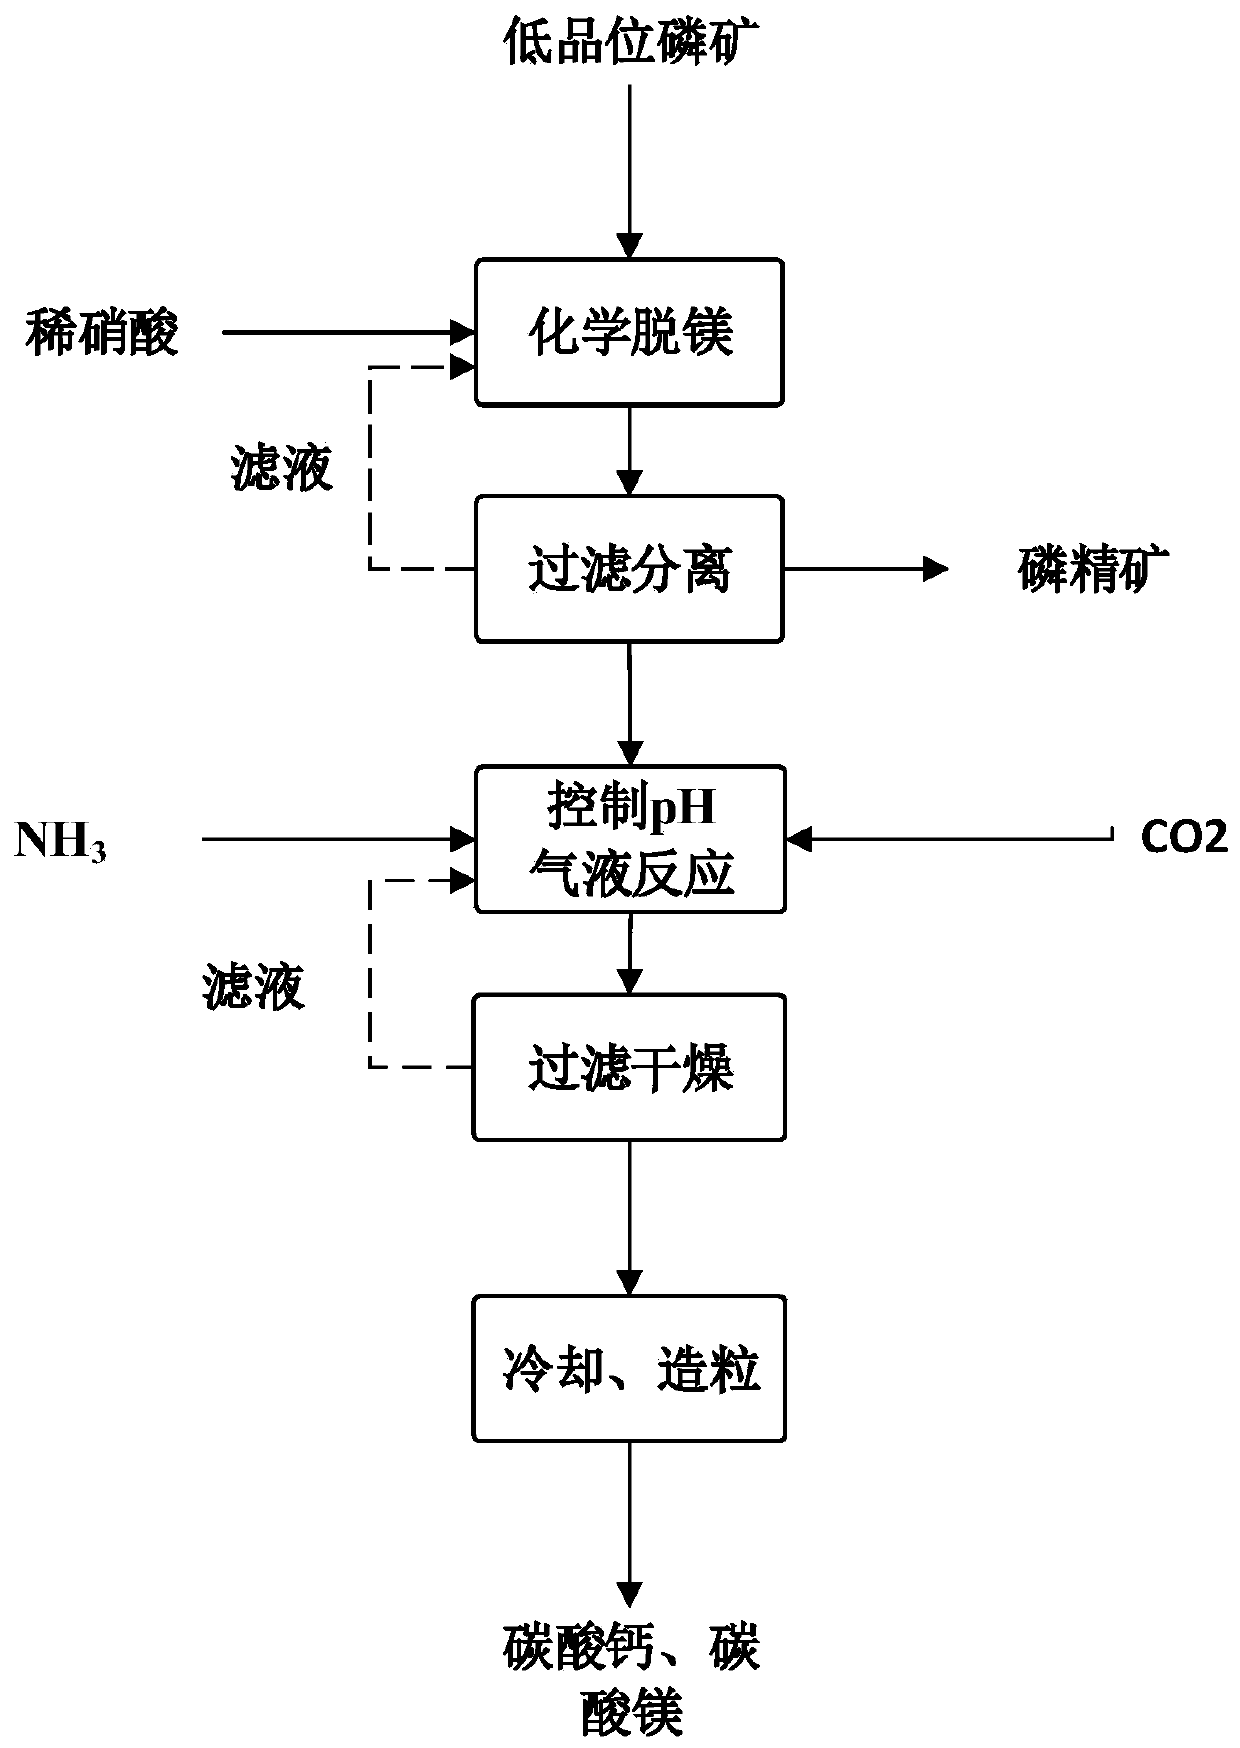 Method for magnesium removal of phosphate rock and co-production of magnesium carbonate and calcium carbonate